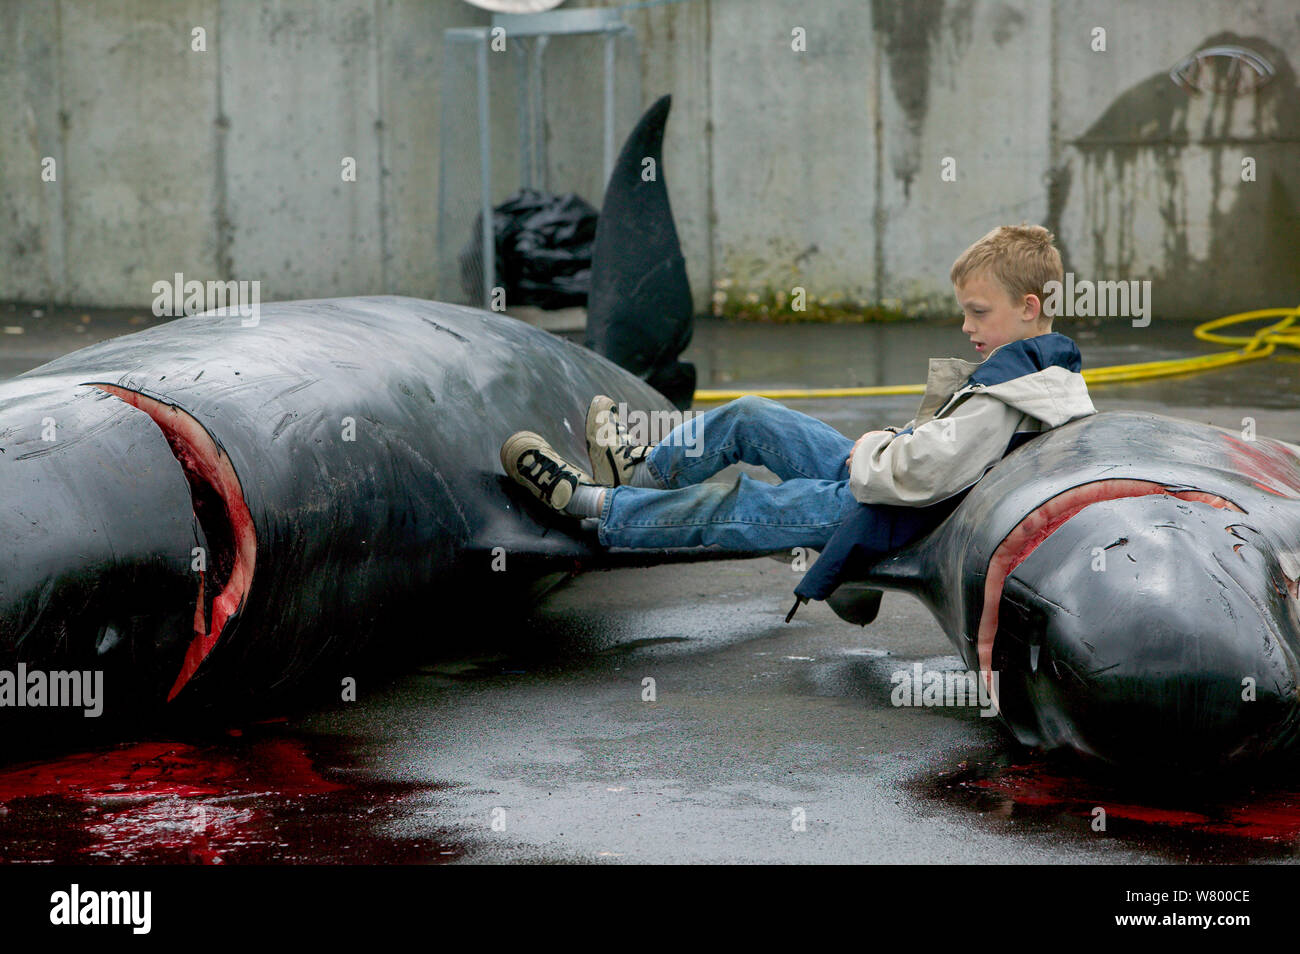 Children playing by carcass of Long finned pilot whale (Globicephala melas) hunted for meat, Faroe Islands, August 2003. Stock Photo